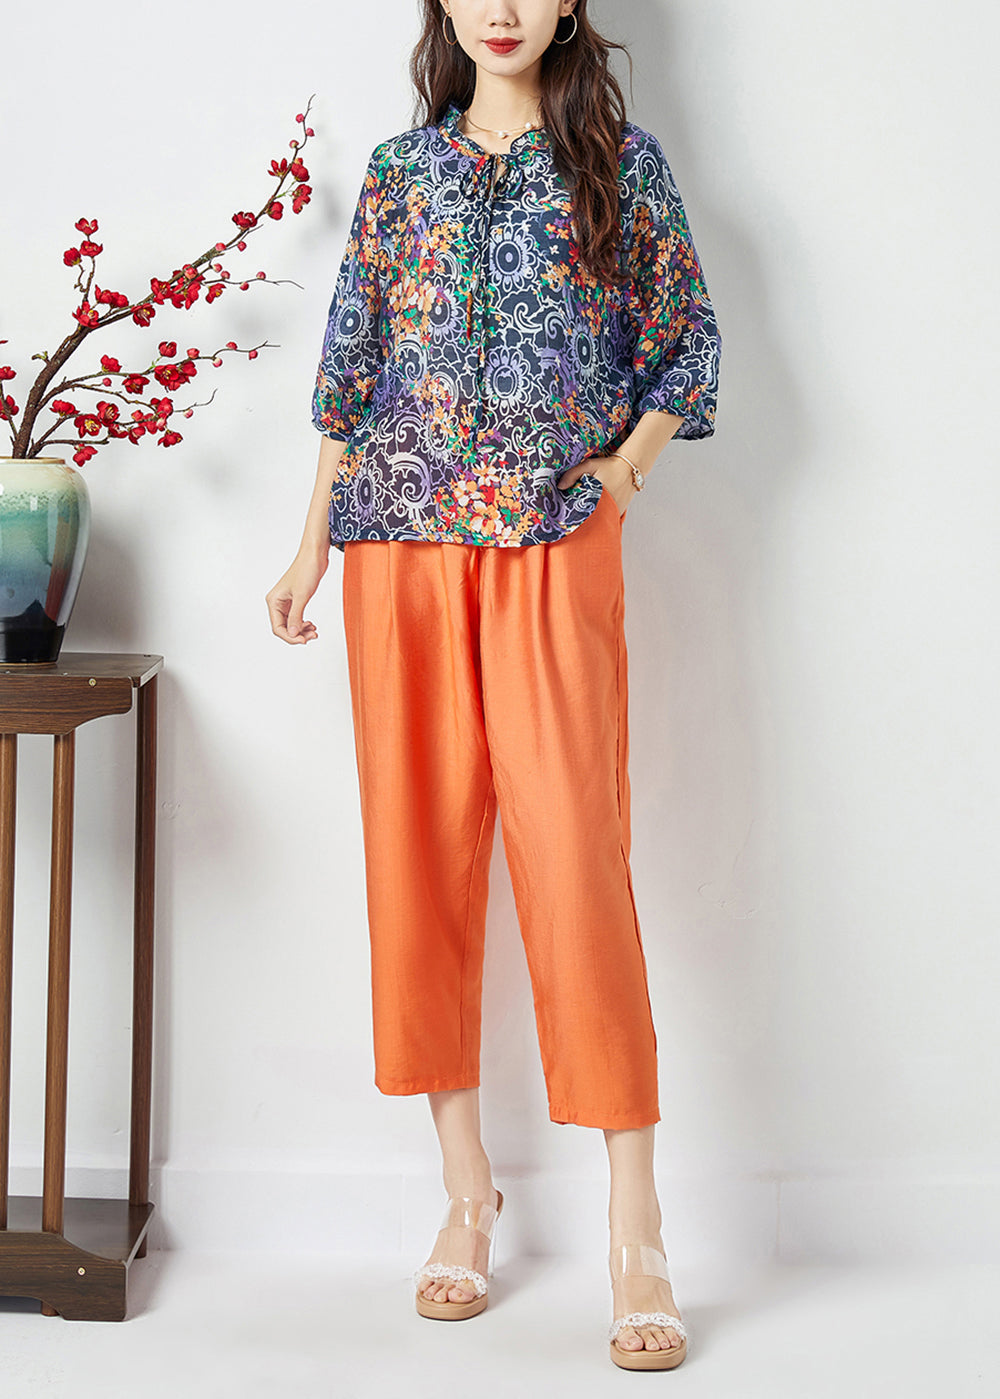 Women Ruffled Lace Up Print Cotton Tops And Pants Two Pieces Set Summer LC0401 - fabuloryshop